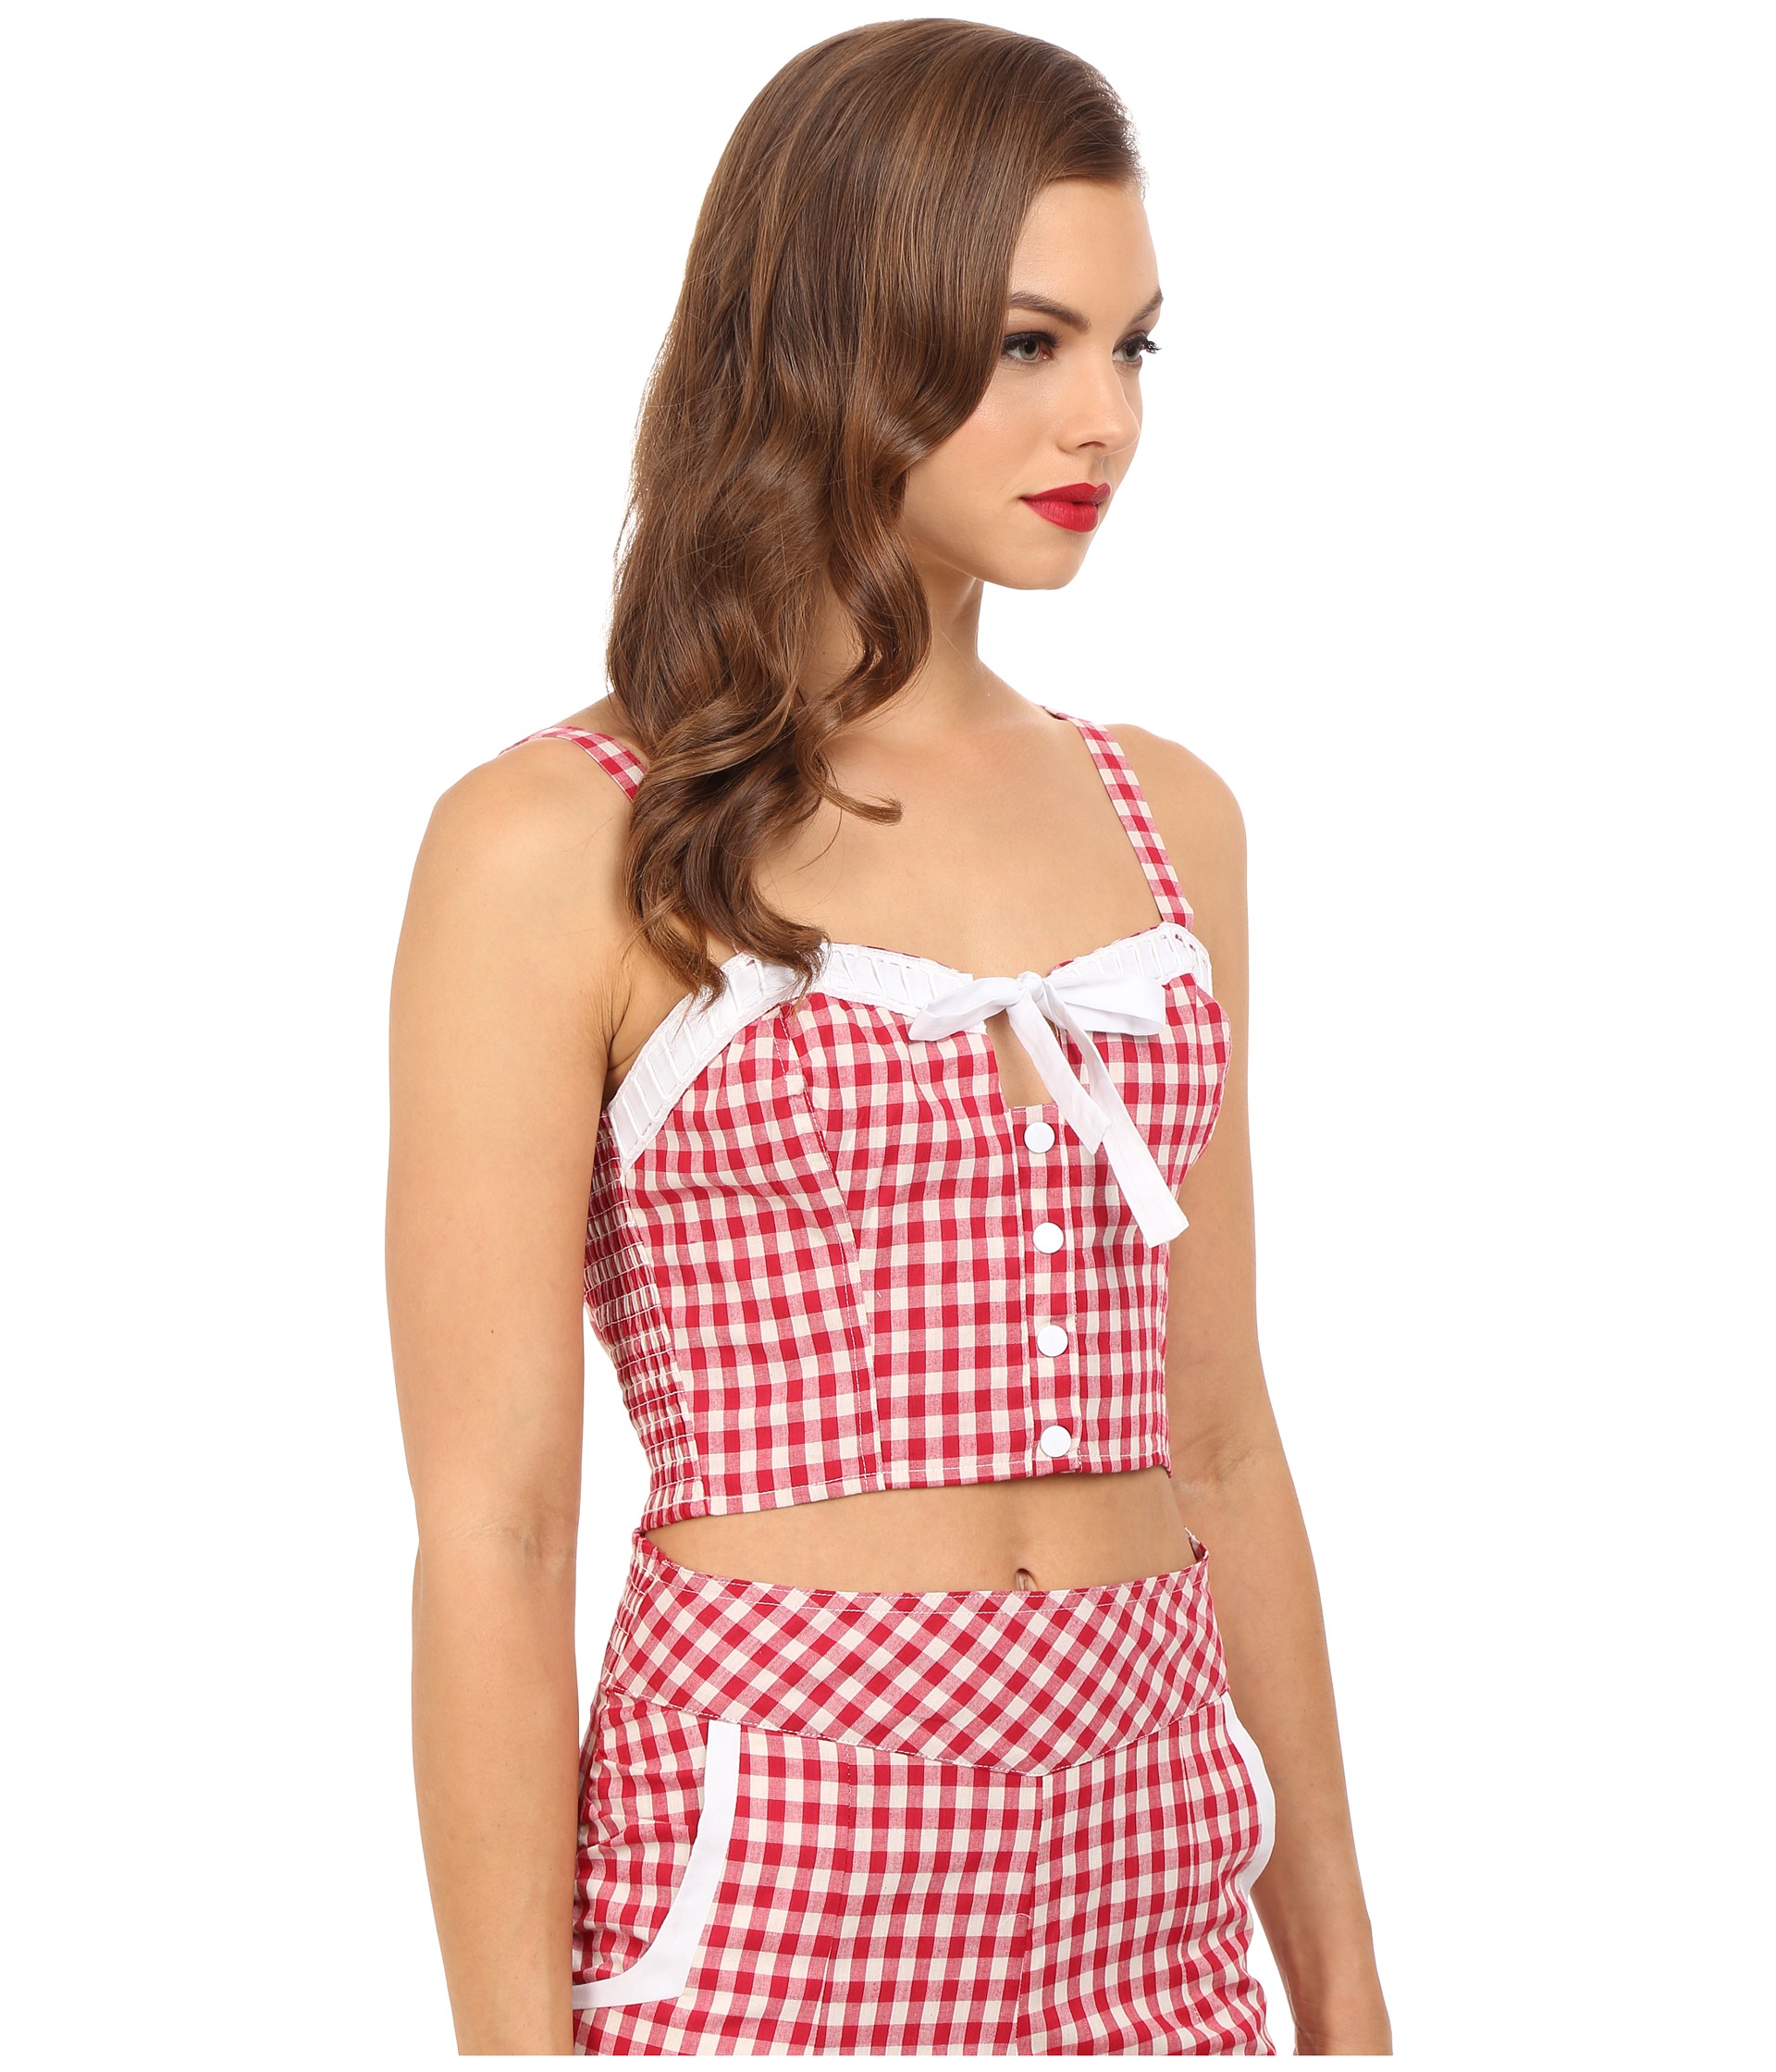 Unique Vintage 1940's Style Daisy Crop Top Red Gingham - Zappos.com ...